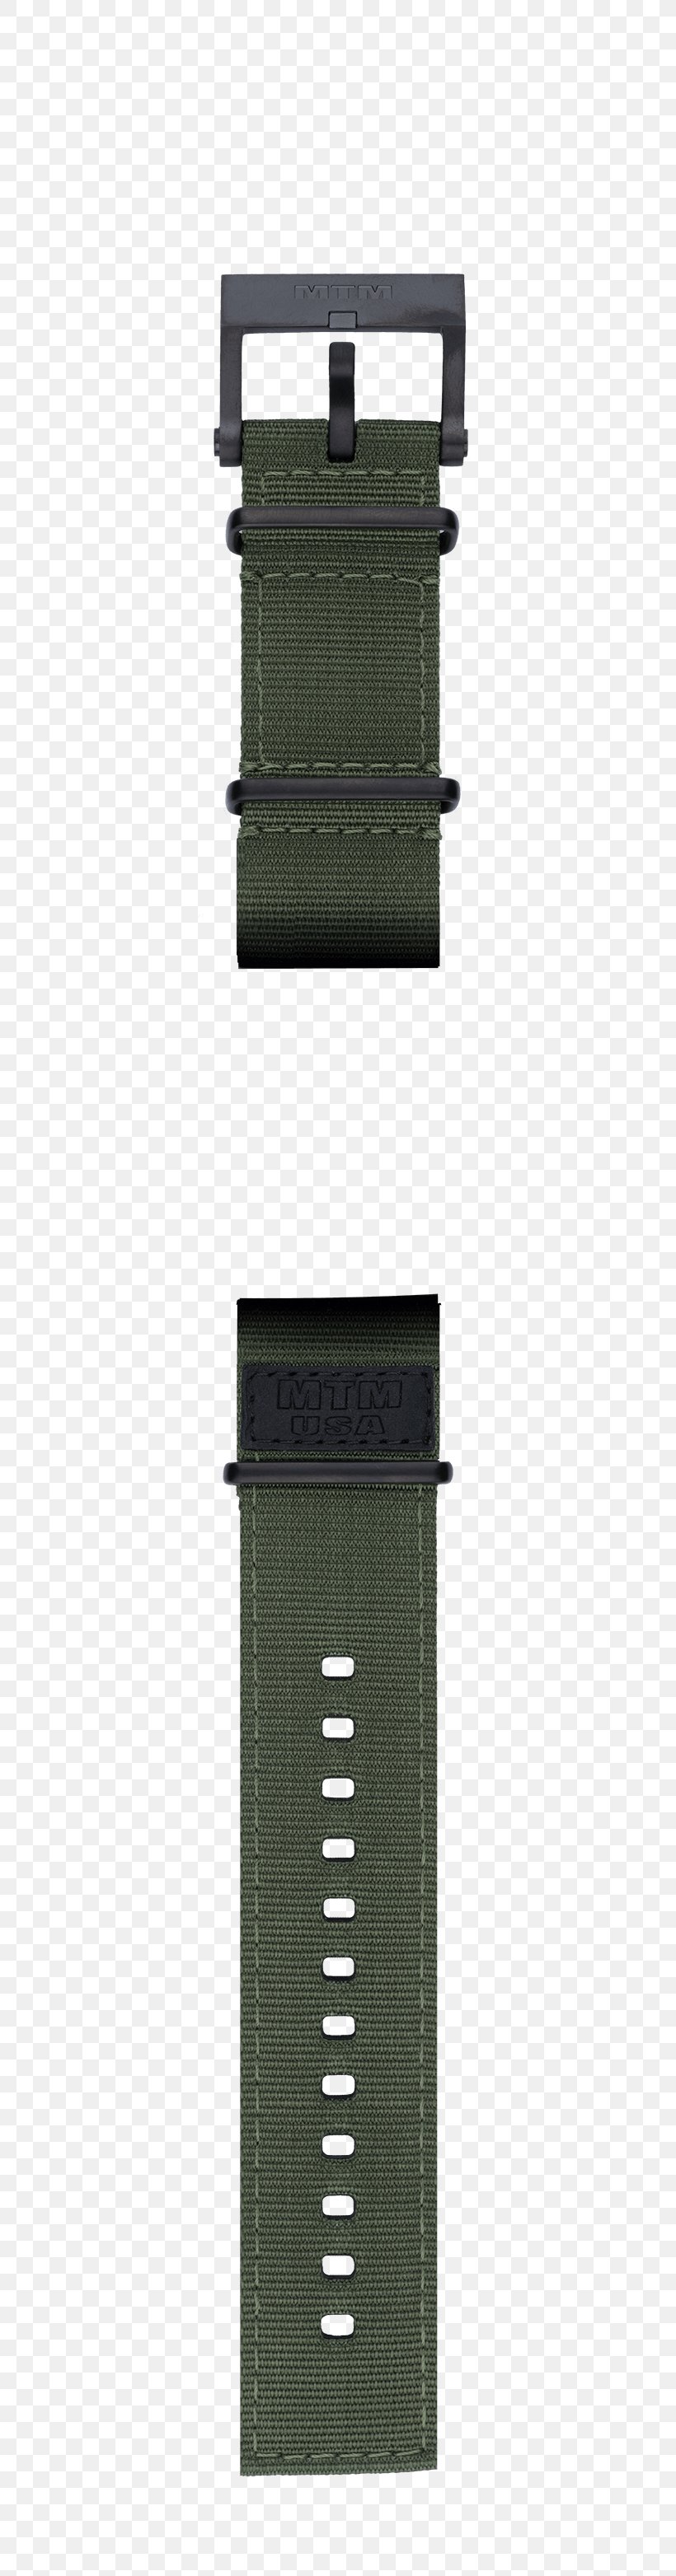 Radiation Geiger Counters Light Gray, PNG, 700x3127px, Radiation, Geiger Counters, Gray, Led Display, Light Download Free